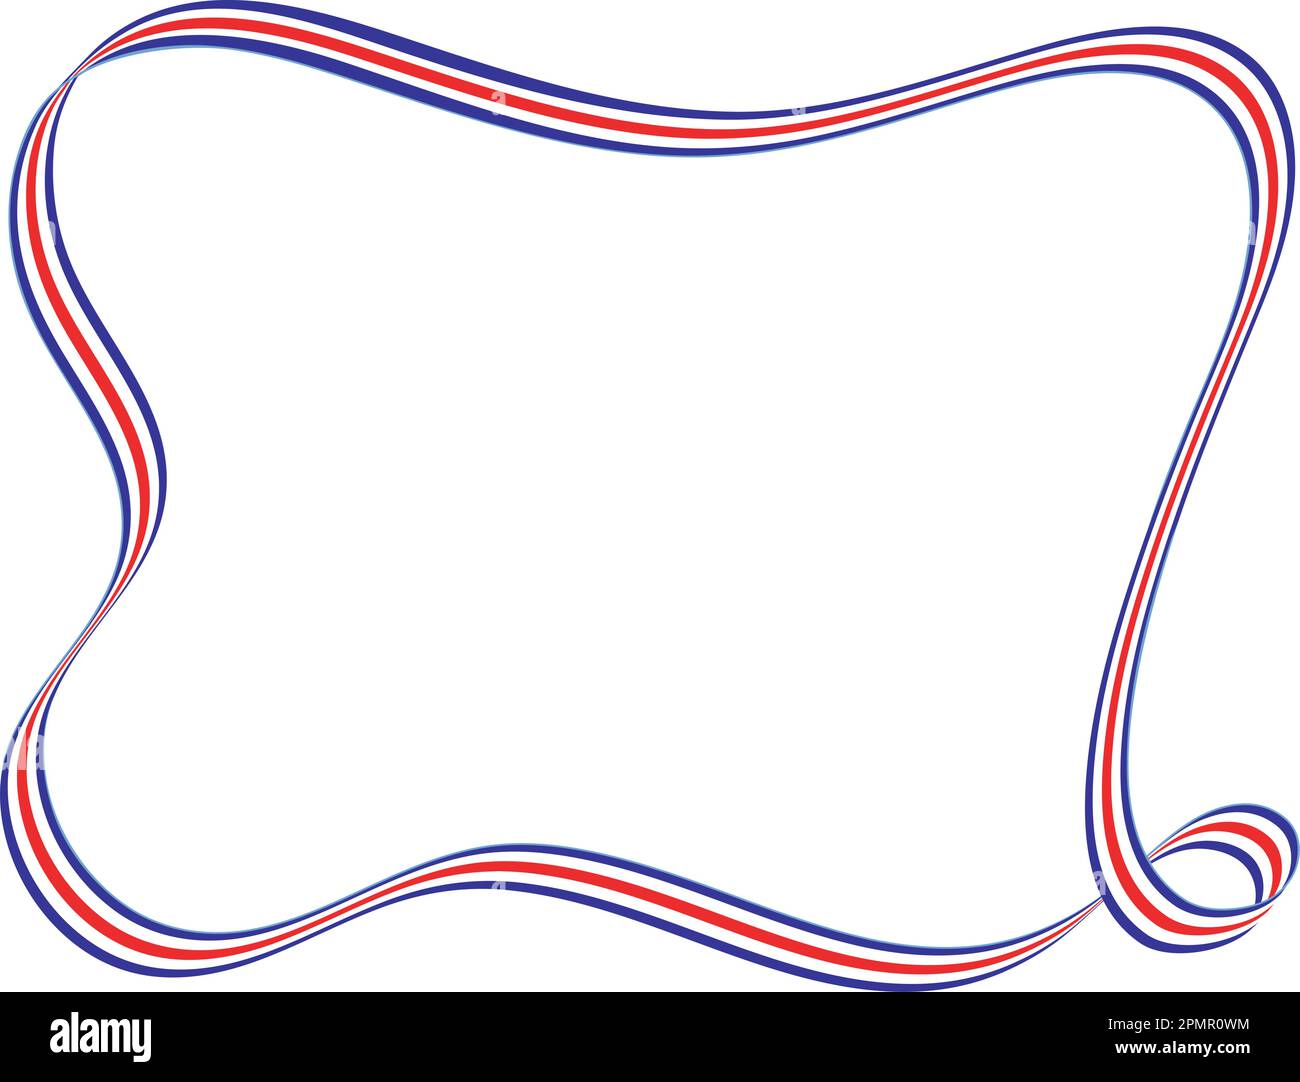 Tricolor border art - red, white, blue. Designed for 11 x 8,5 inches, but may be carefully altered. Please be careful of excessive distortion, Stock Vector